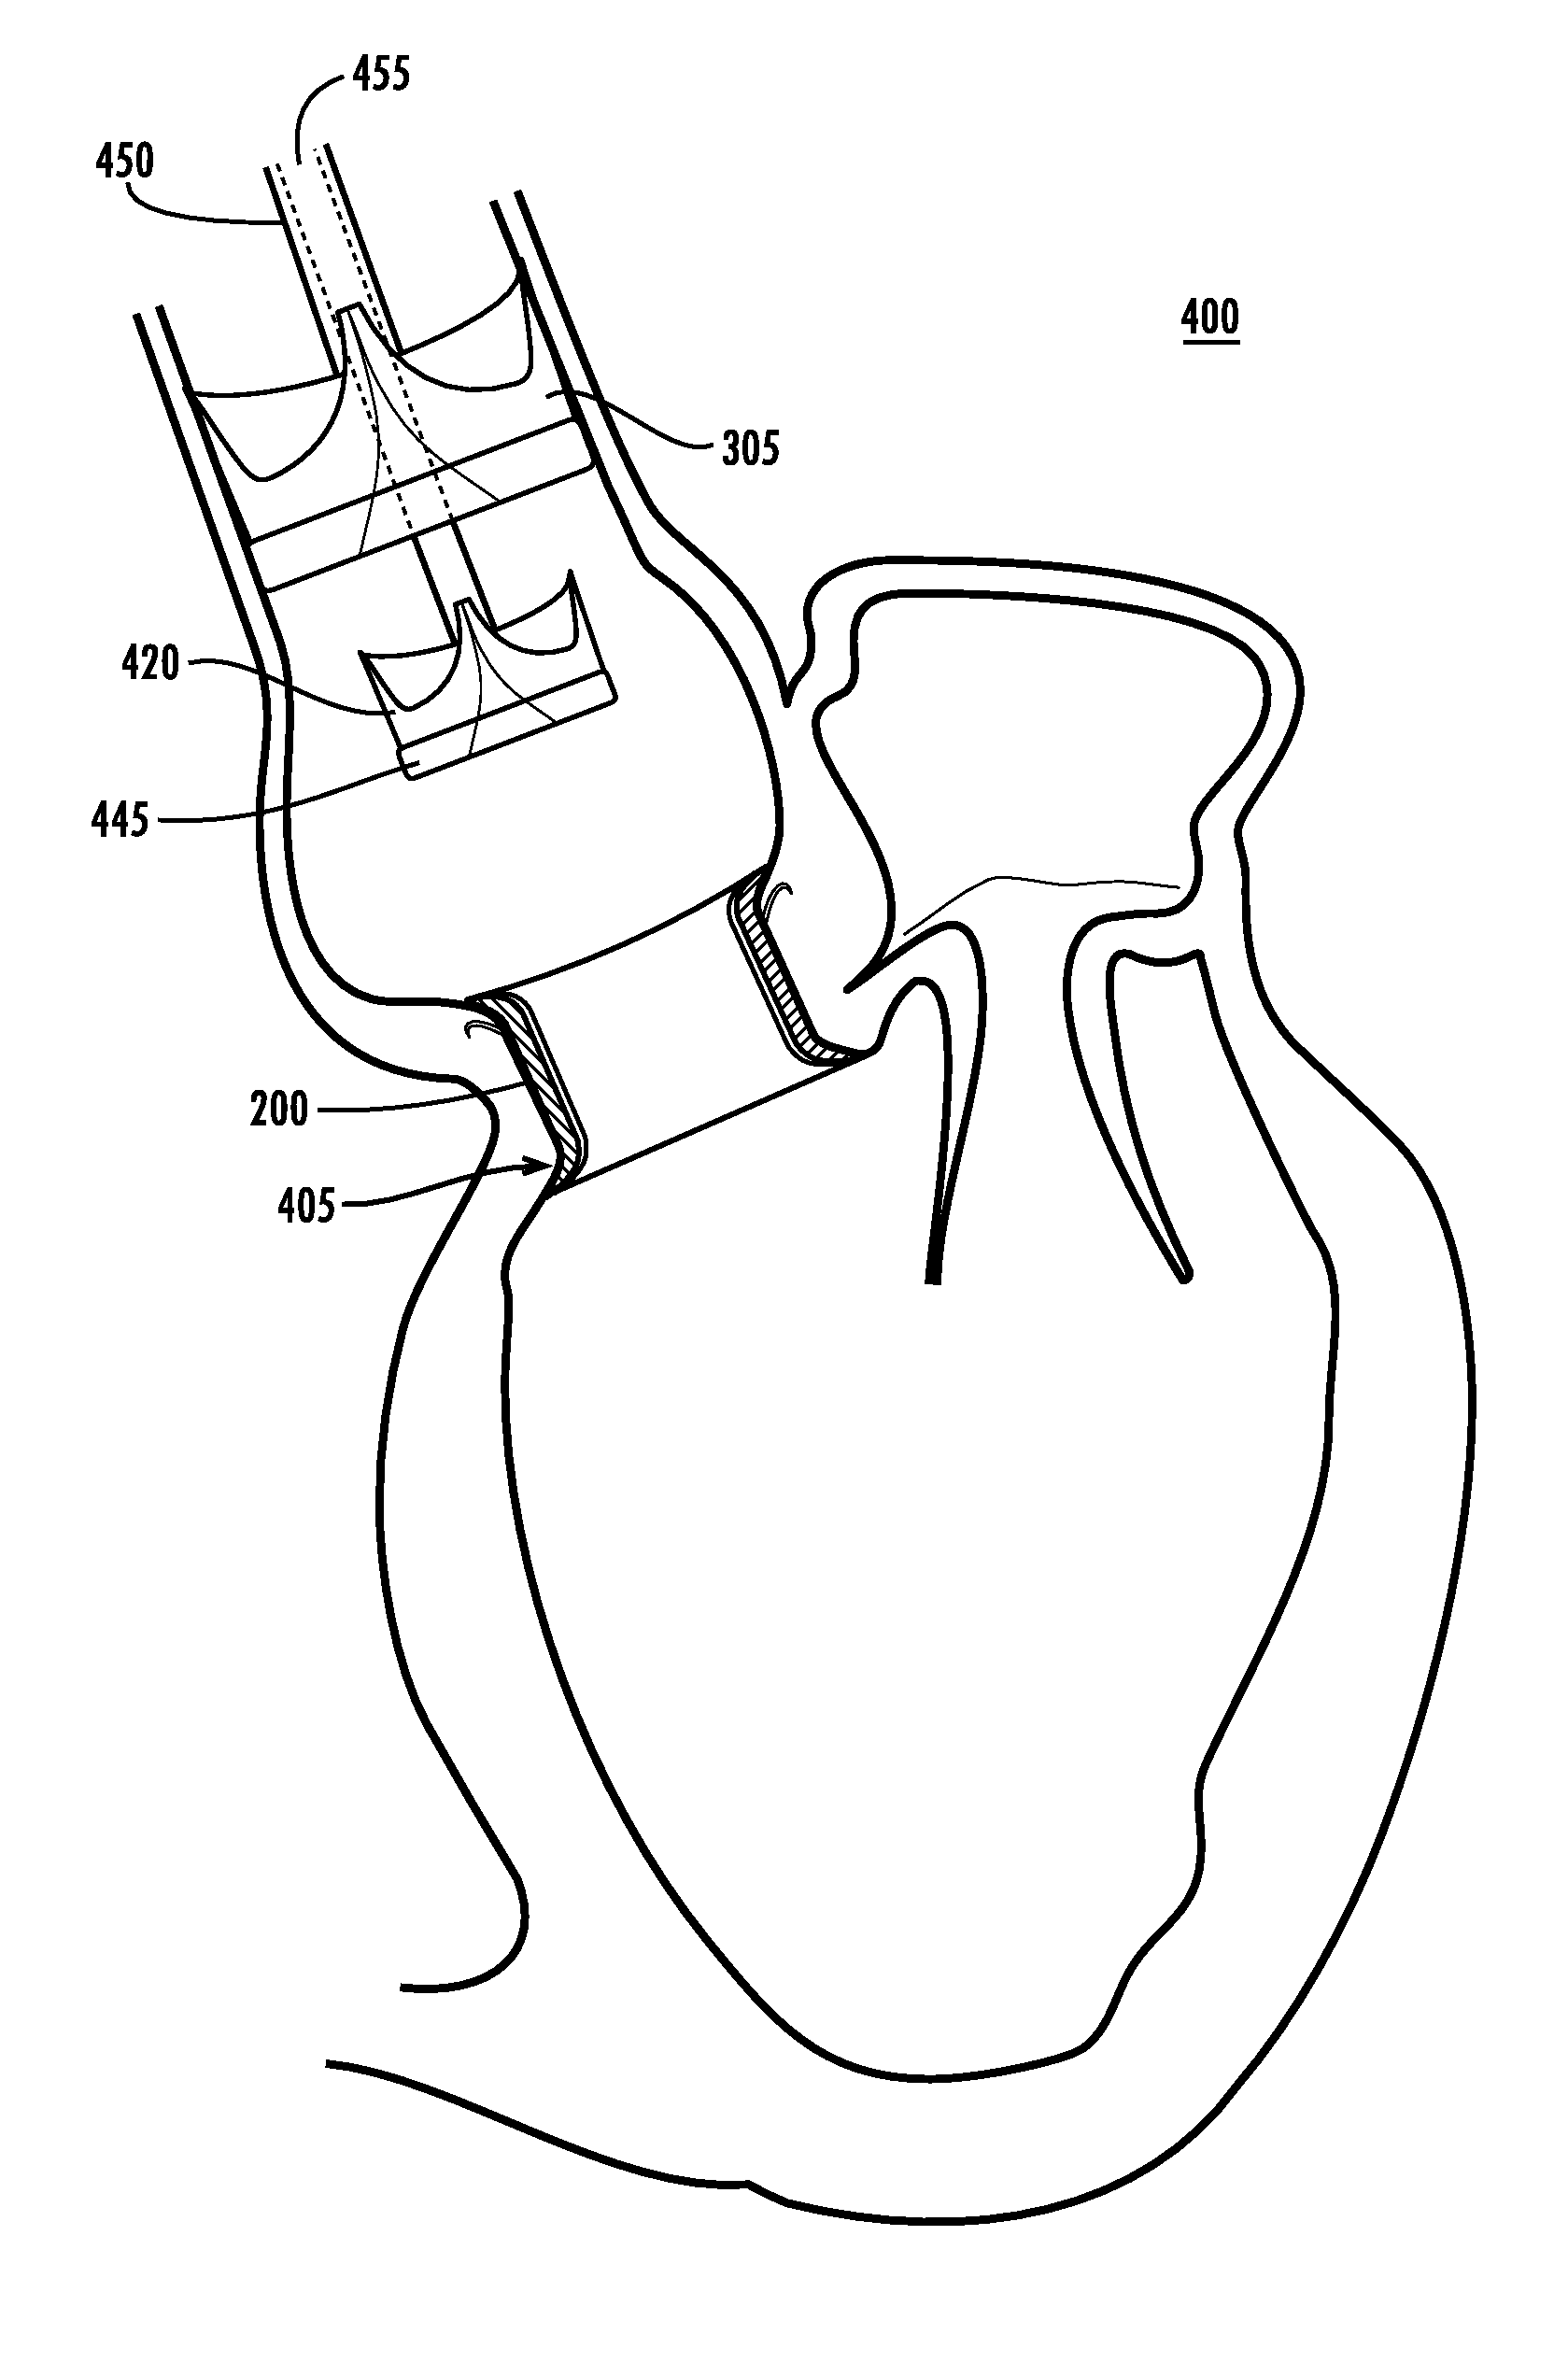 Replaceable Heart Valve Prosthesis